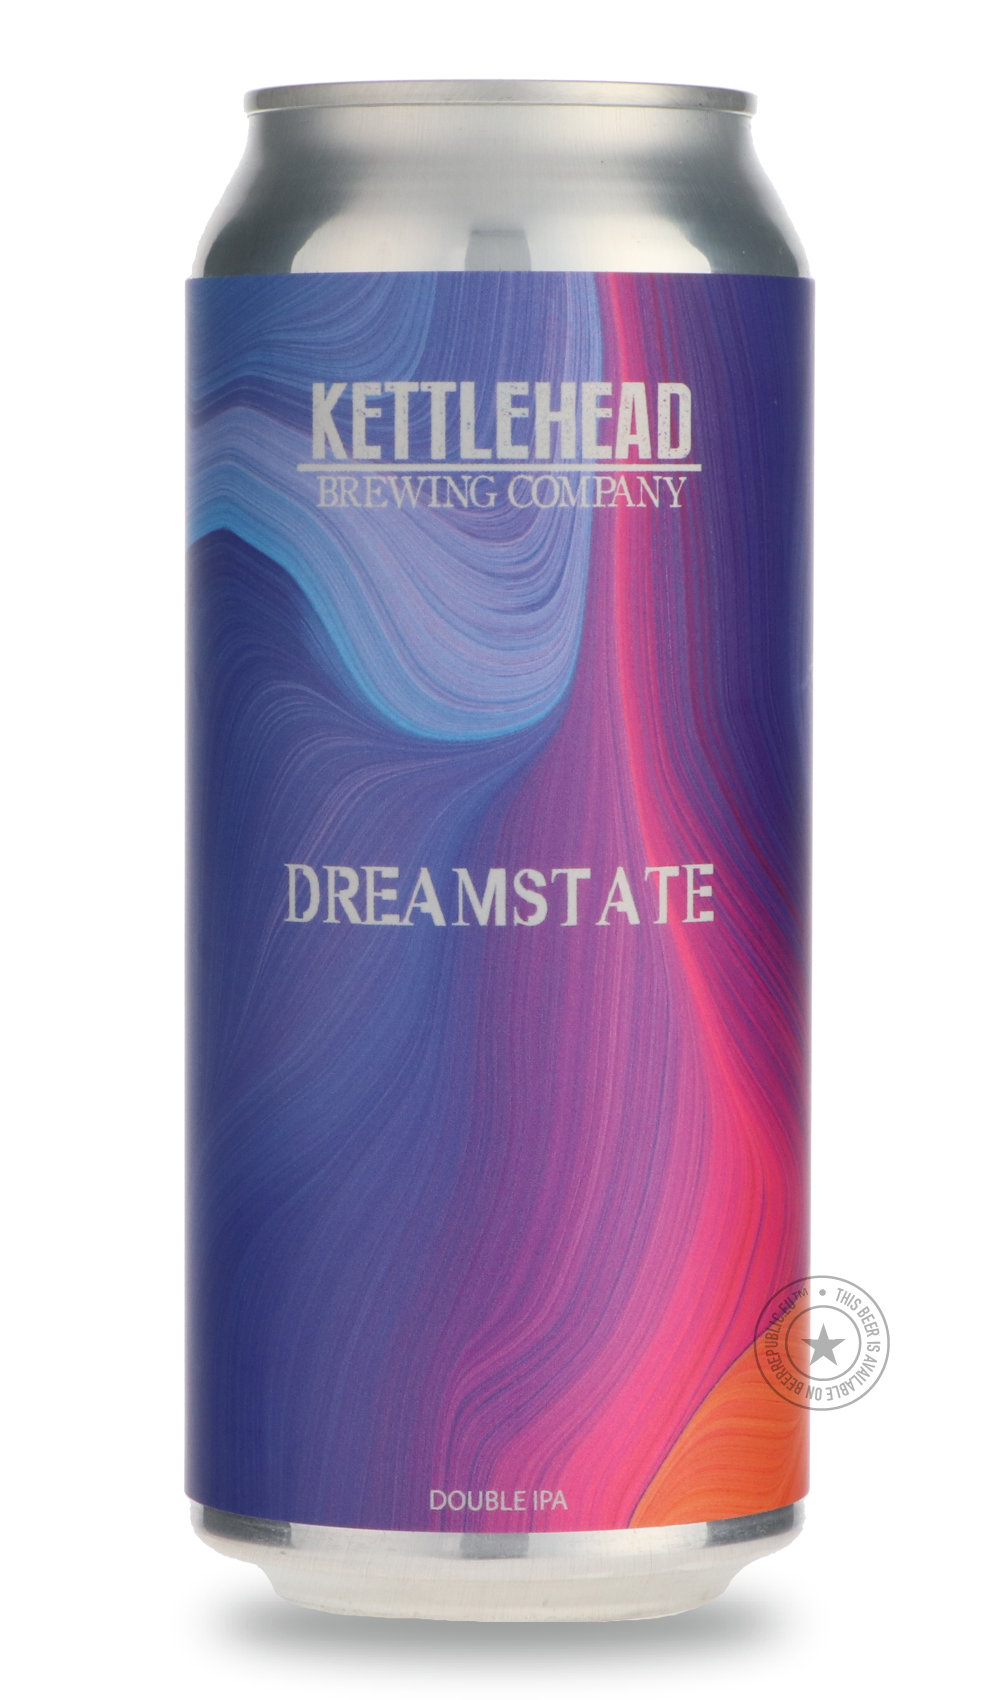 -Kettlehead- Dreamstate-IPA- Only @ Beer Republic - The best online beer store for American & Canadian craft beer - Buy beer online from the USA and Canada - Bier online kopen - Amerikaans bier kopen - Craft beer store - Craft beer kopen - Amerikanisch bier kaufen - Bier online kaufen - Acheter biere online - IPA - Stout - Porter - New England IPA - Hazy IPA - Imperial Stout - Barrel Aged - Barrel Aged Imperial Stout - Brown - Dark beer - Blond - Blonde - Pilsner - Lager - Wheat - Weizen - Amber - Barley Wi